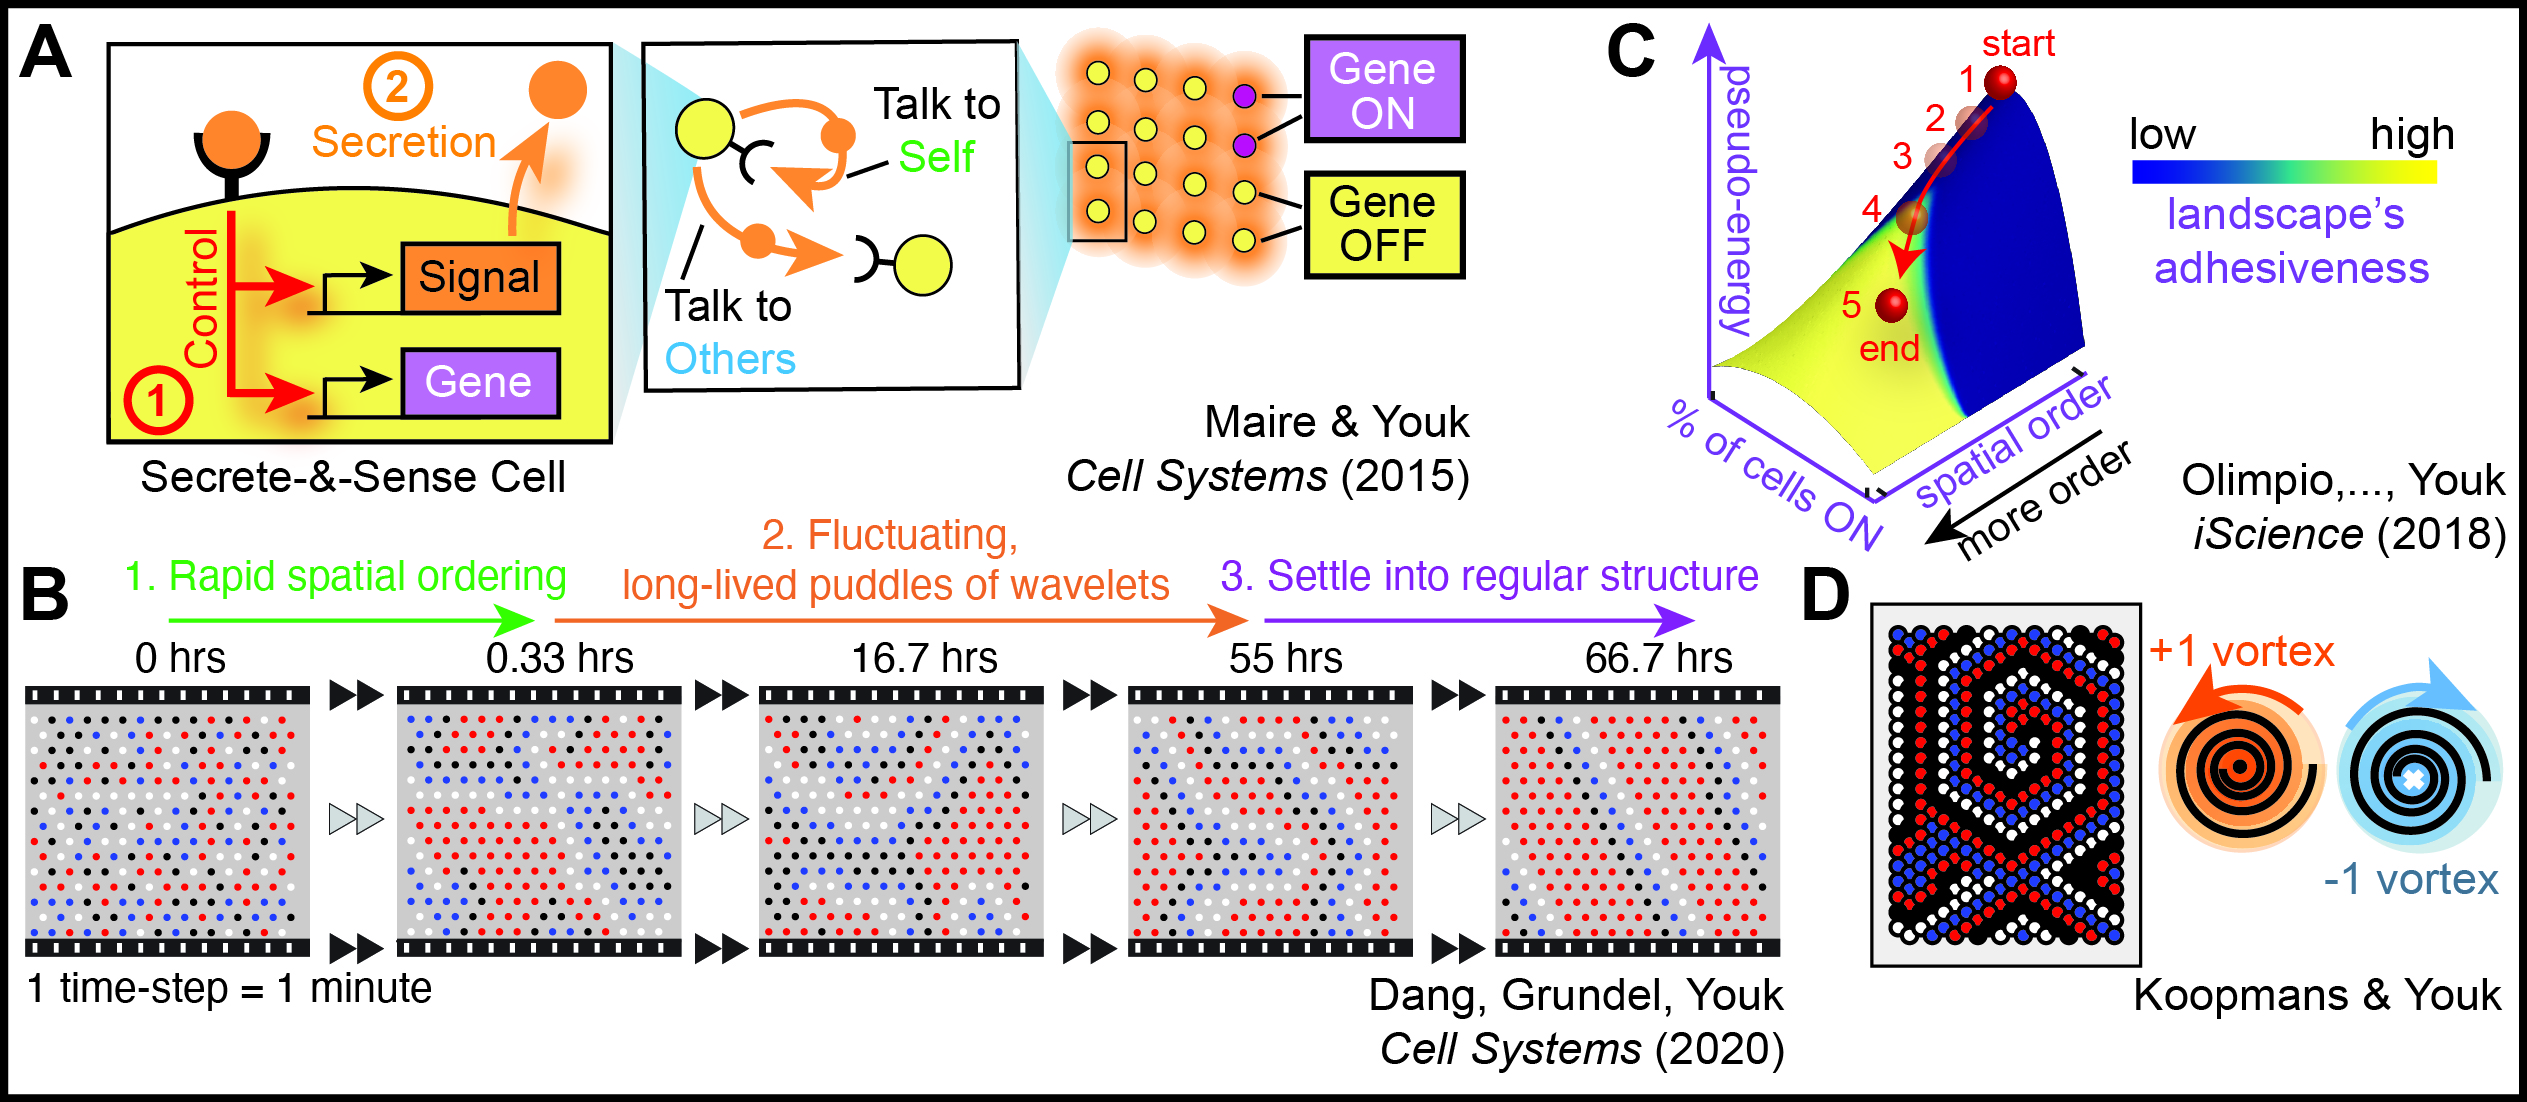 “Computational experiments” revealed both static and dynamic spatial patterns (e.g., spiral waves) and 
the spatial-ordering process through which they form, starting from a field of cells that have no spatial order. Here, 
each cell secretes and senses one or two molecules, thereby enabling cells to control each other’s gene expression 
over a long distance (i.e., beyond nearest neighbors).